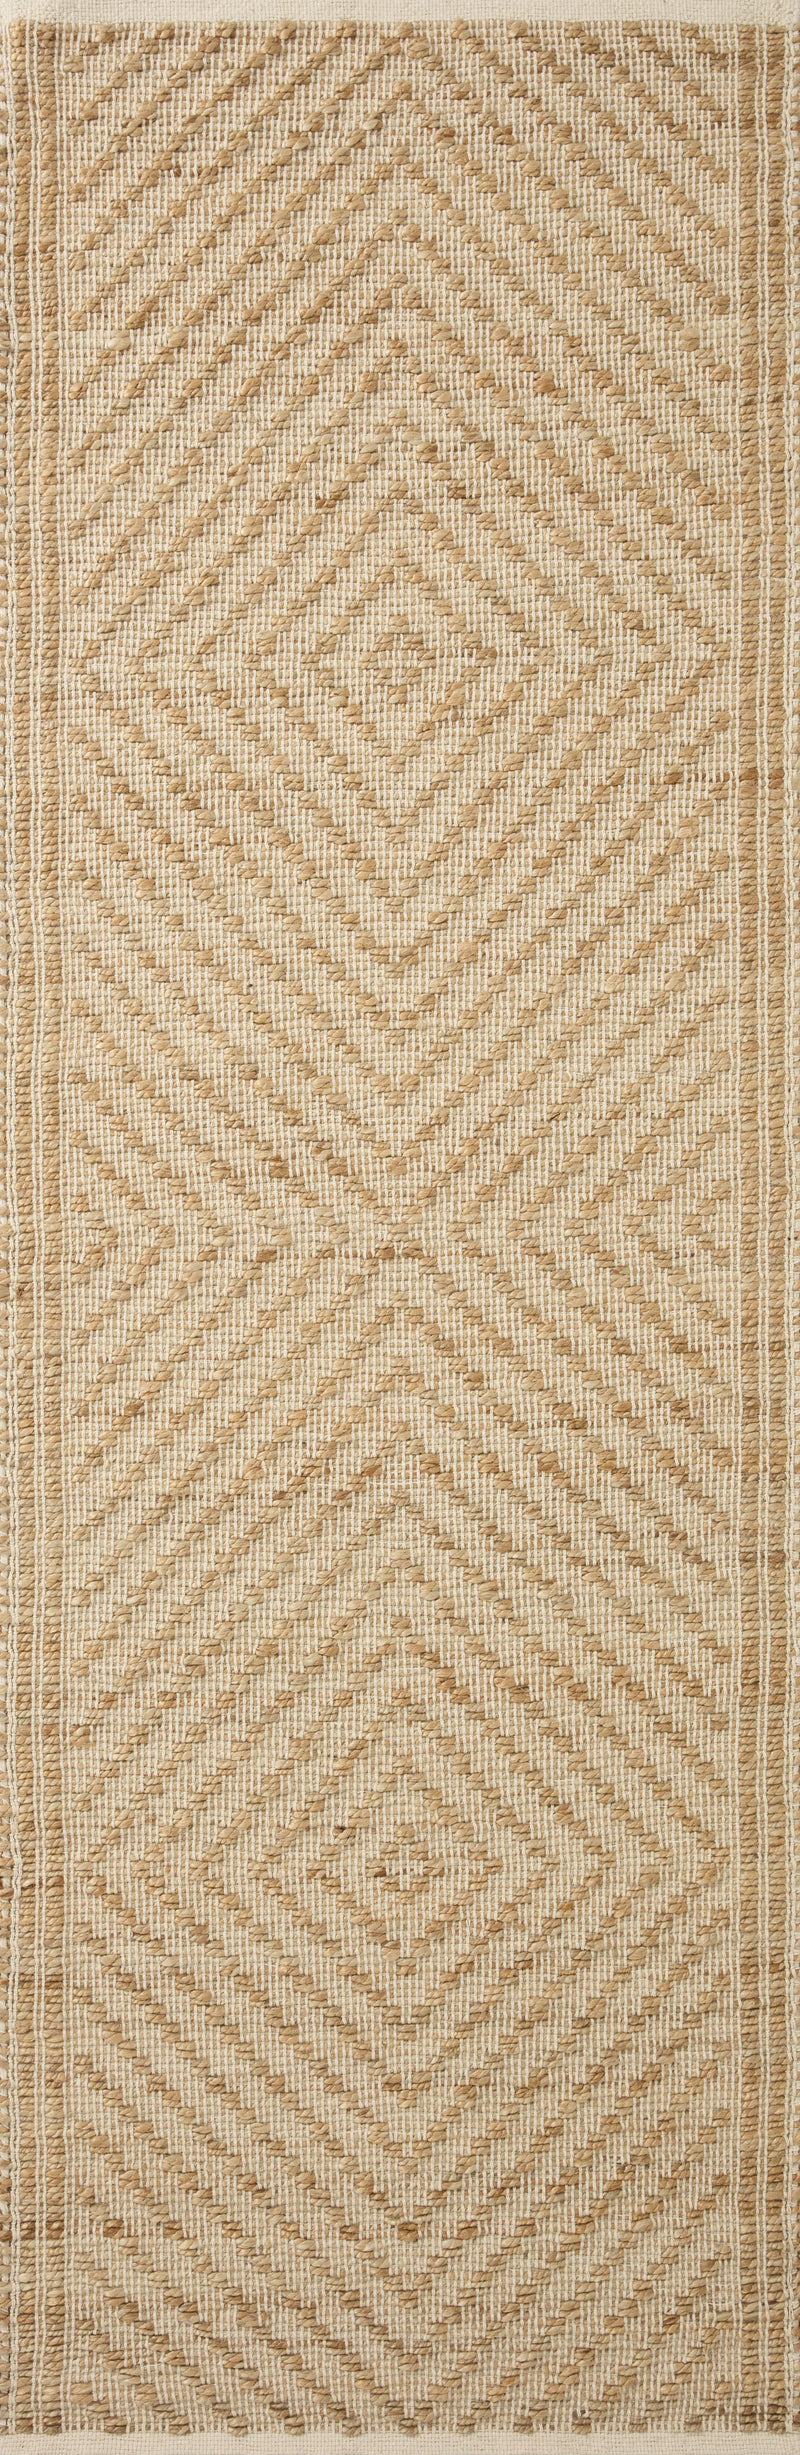 media image for colton hand woven natural ivory rug by angela rose x loloi colocon 04naiv2030 2 279